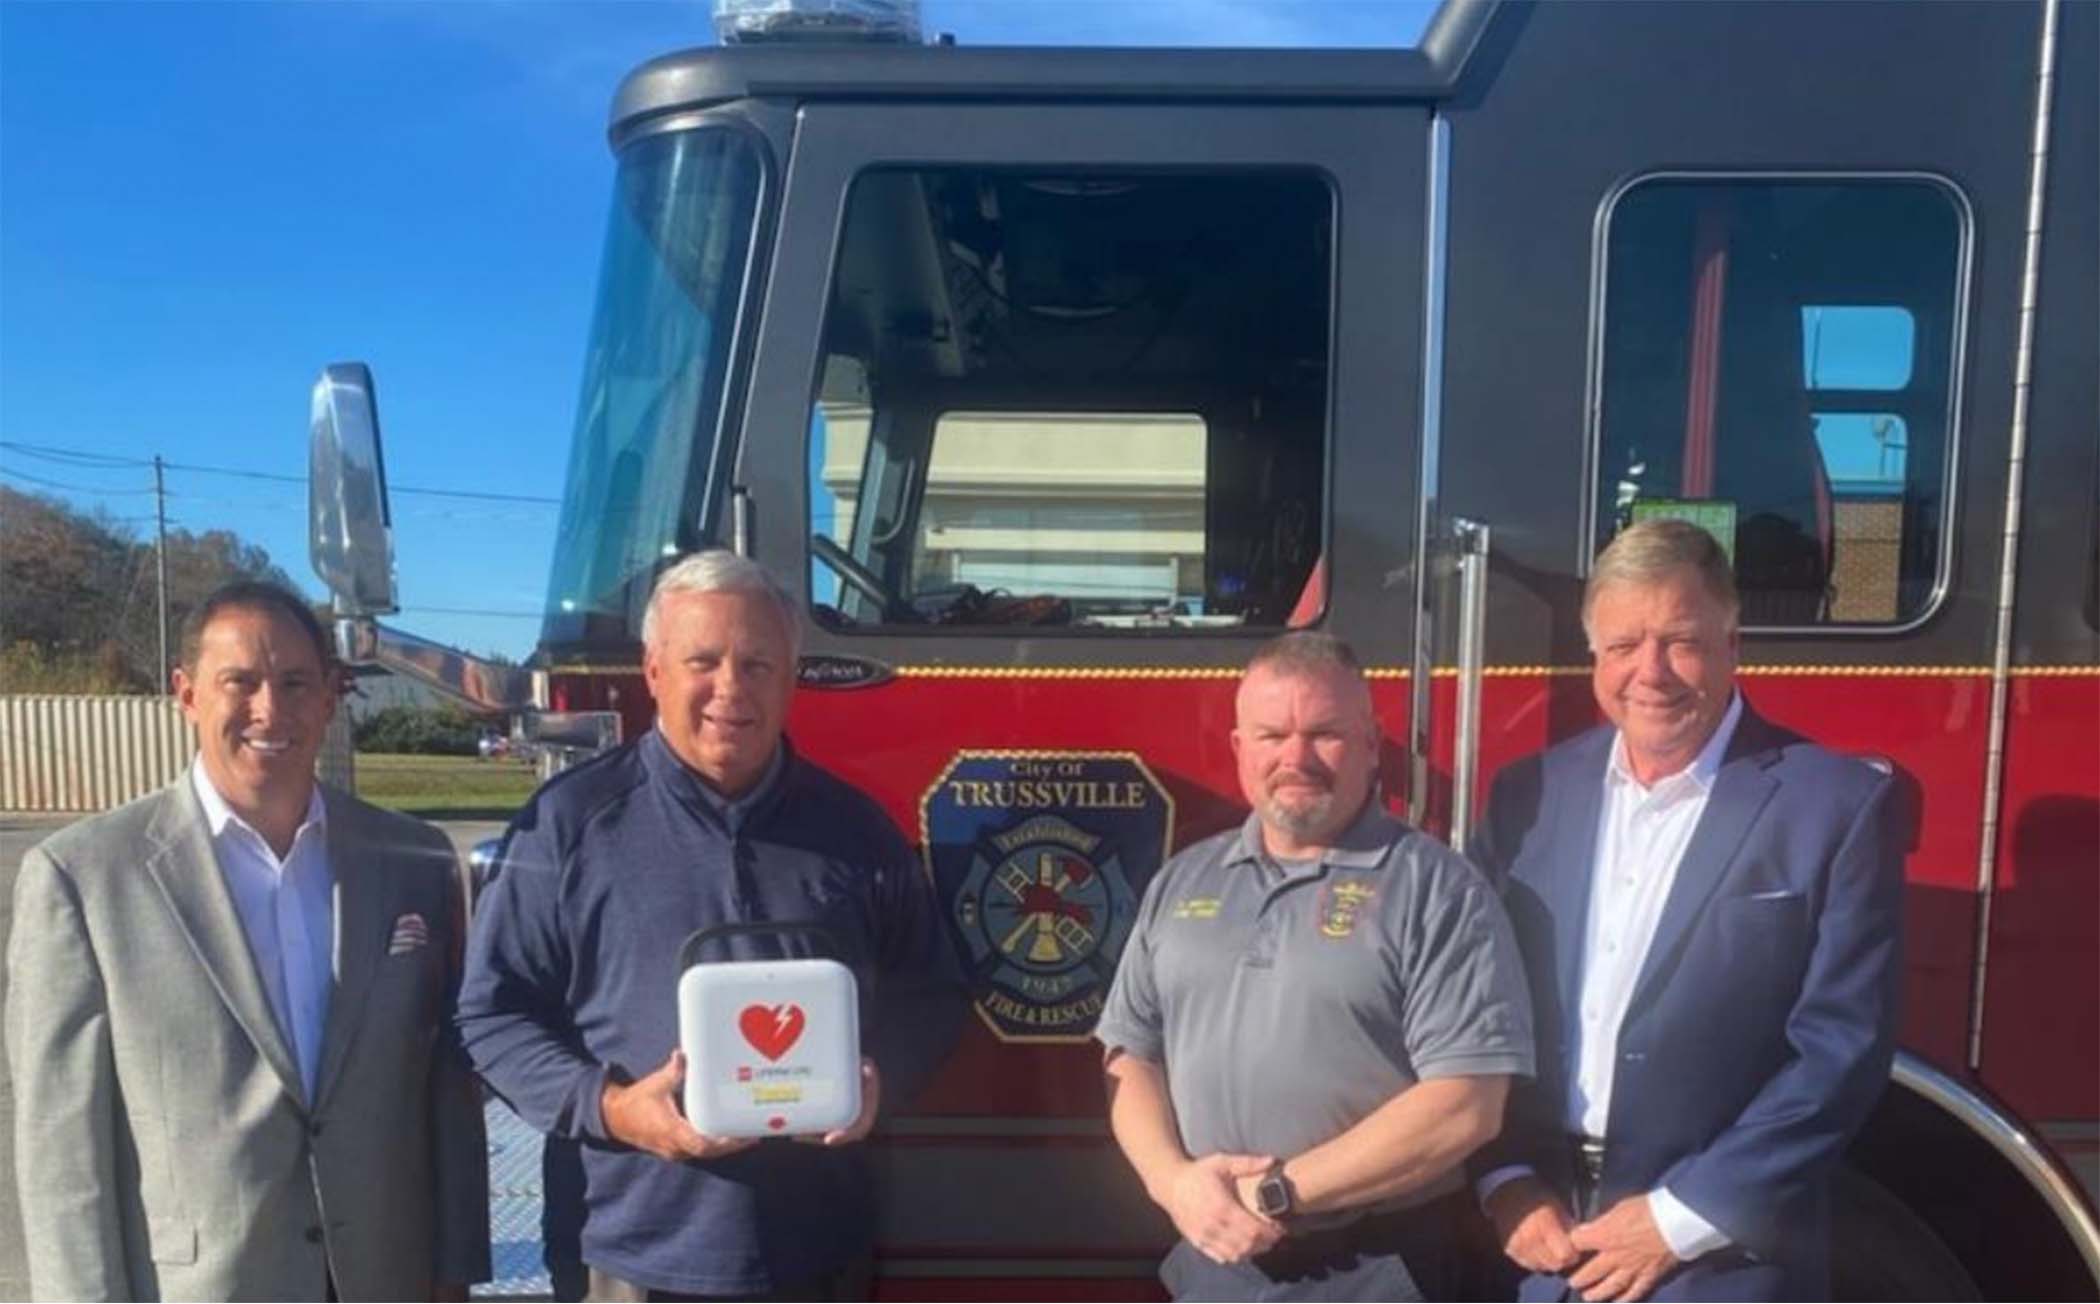 Trussville selects Cardiac Solutions as AED partner